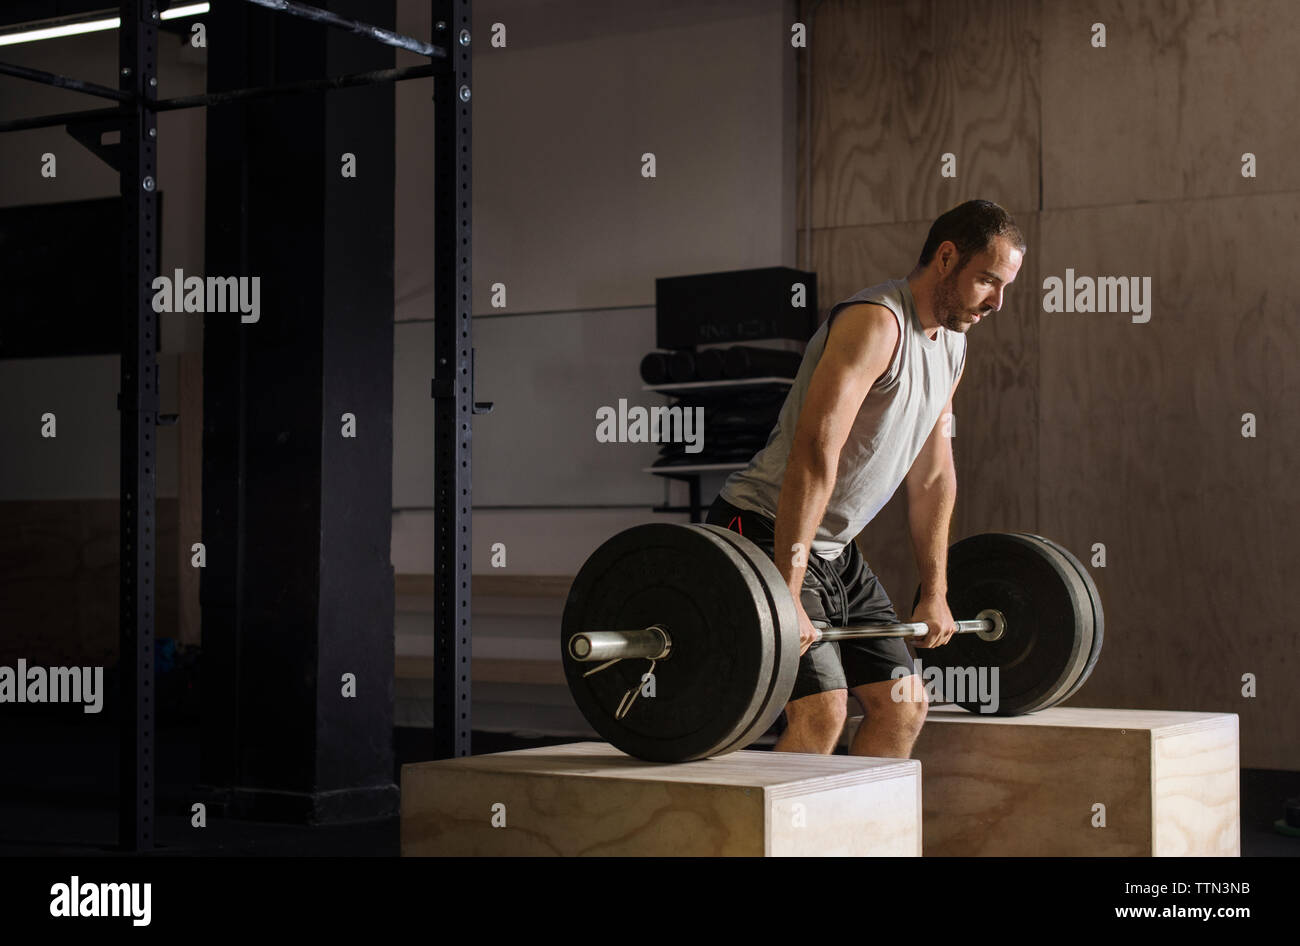 Determined male athlete lifting barbell in gym Stock Photo